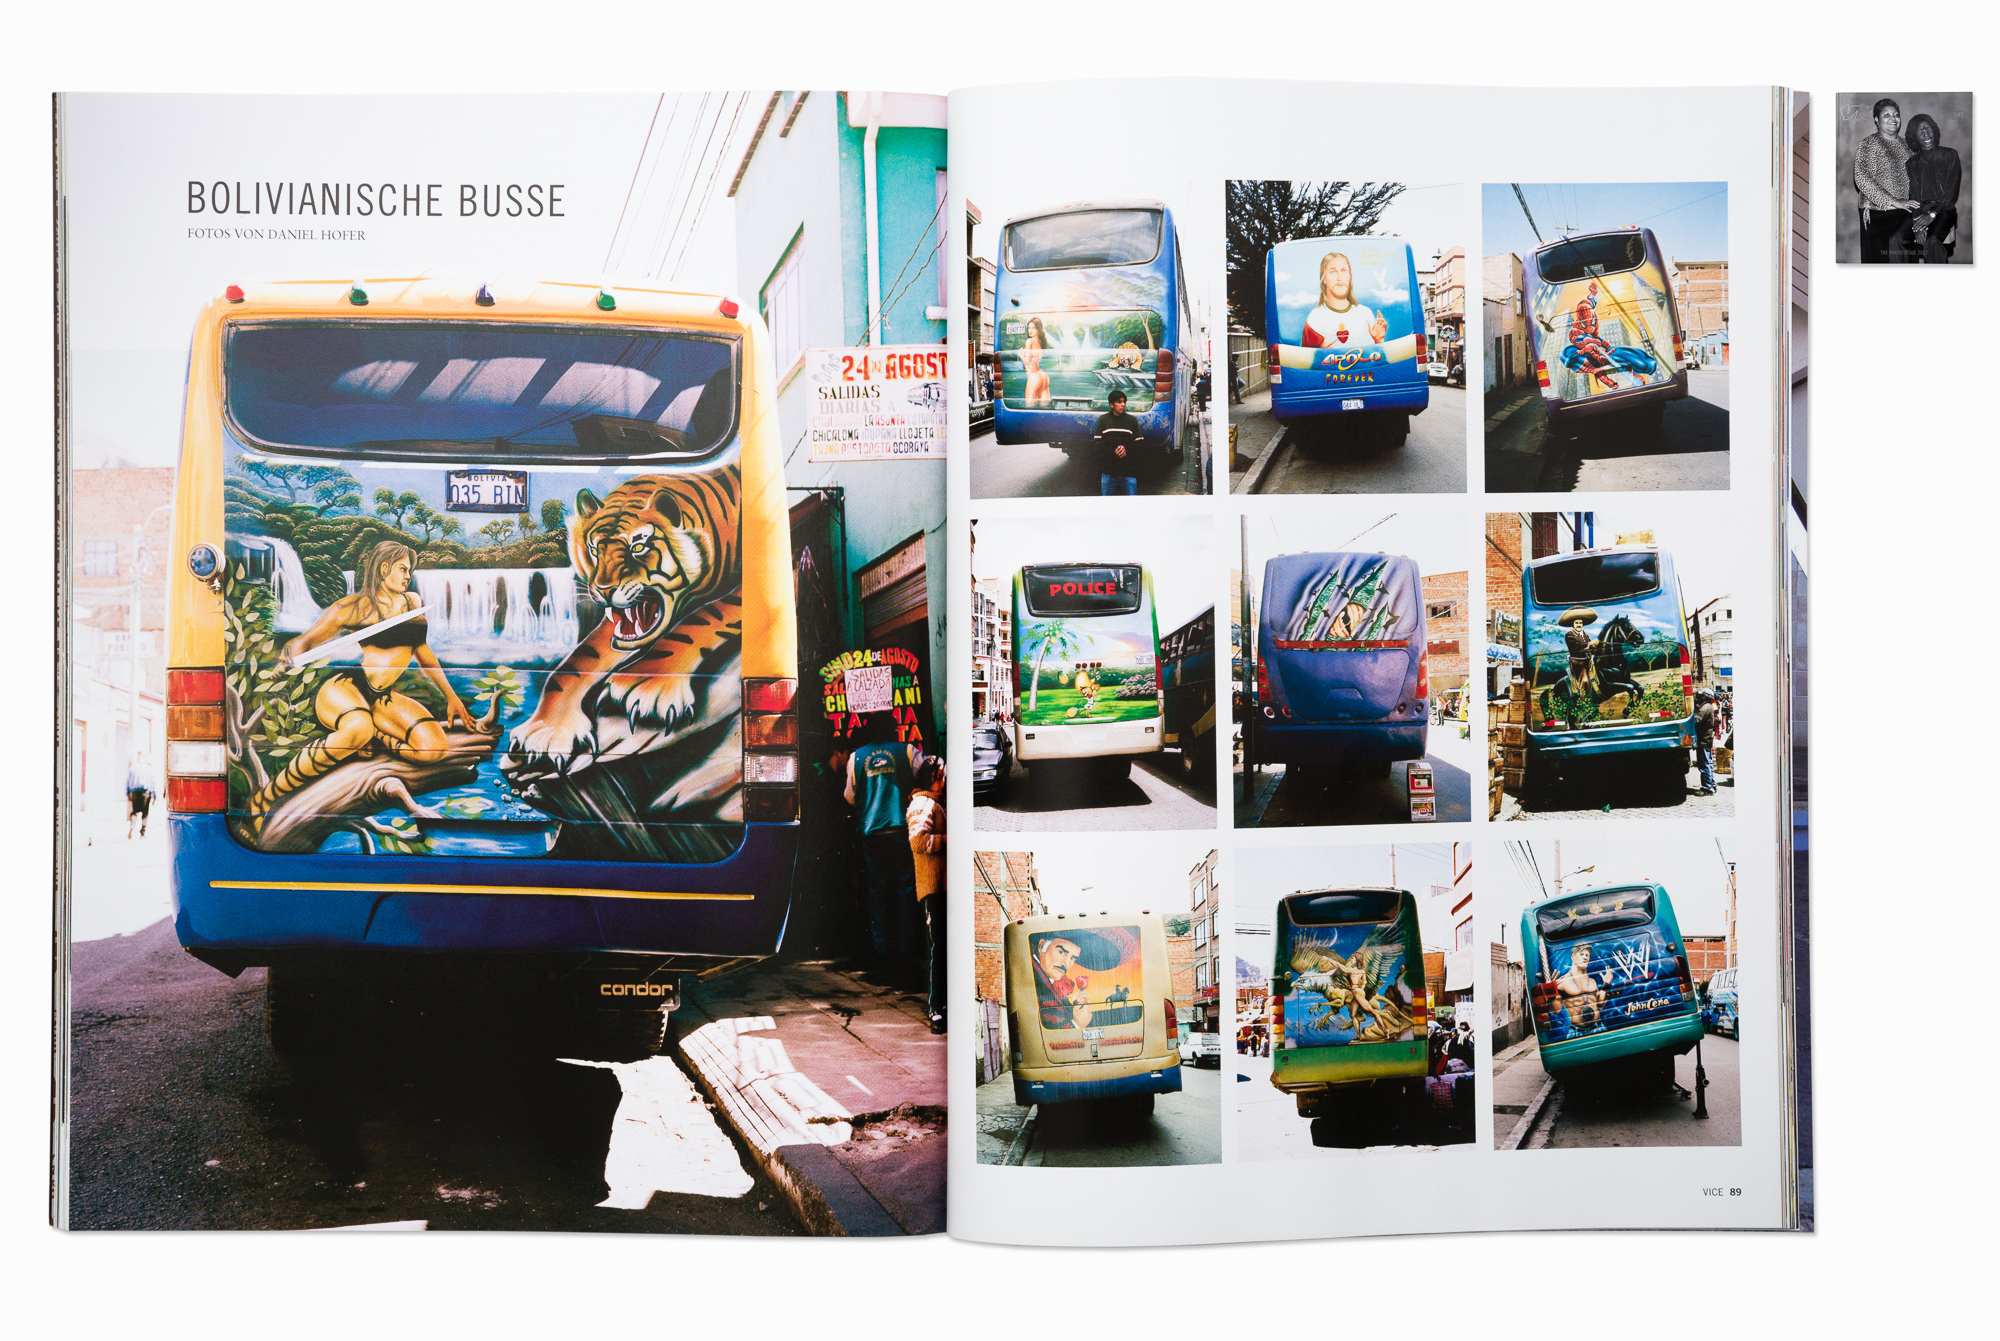   "Bolivian Busses", published in VICE magazin photo issue (Germany &amp; UK)  